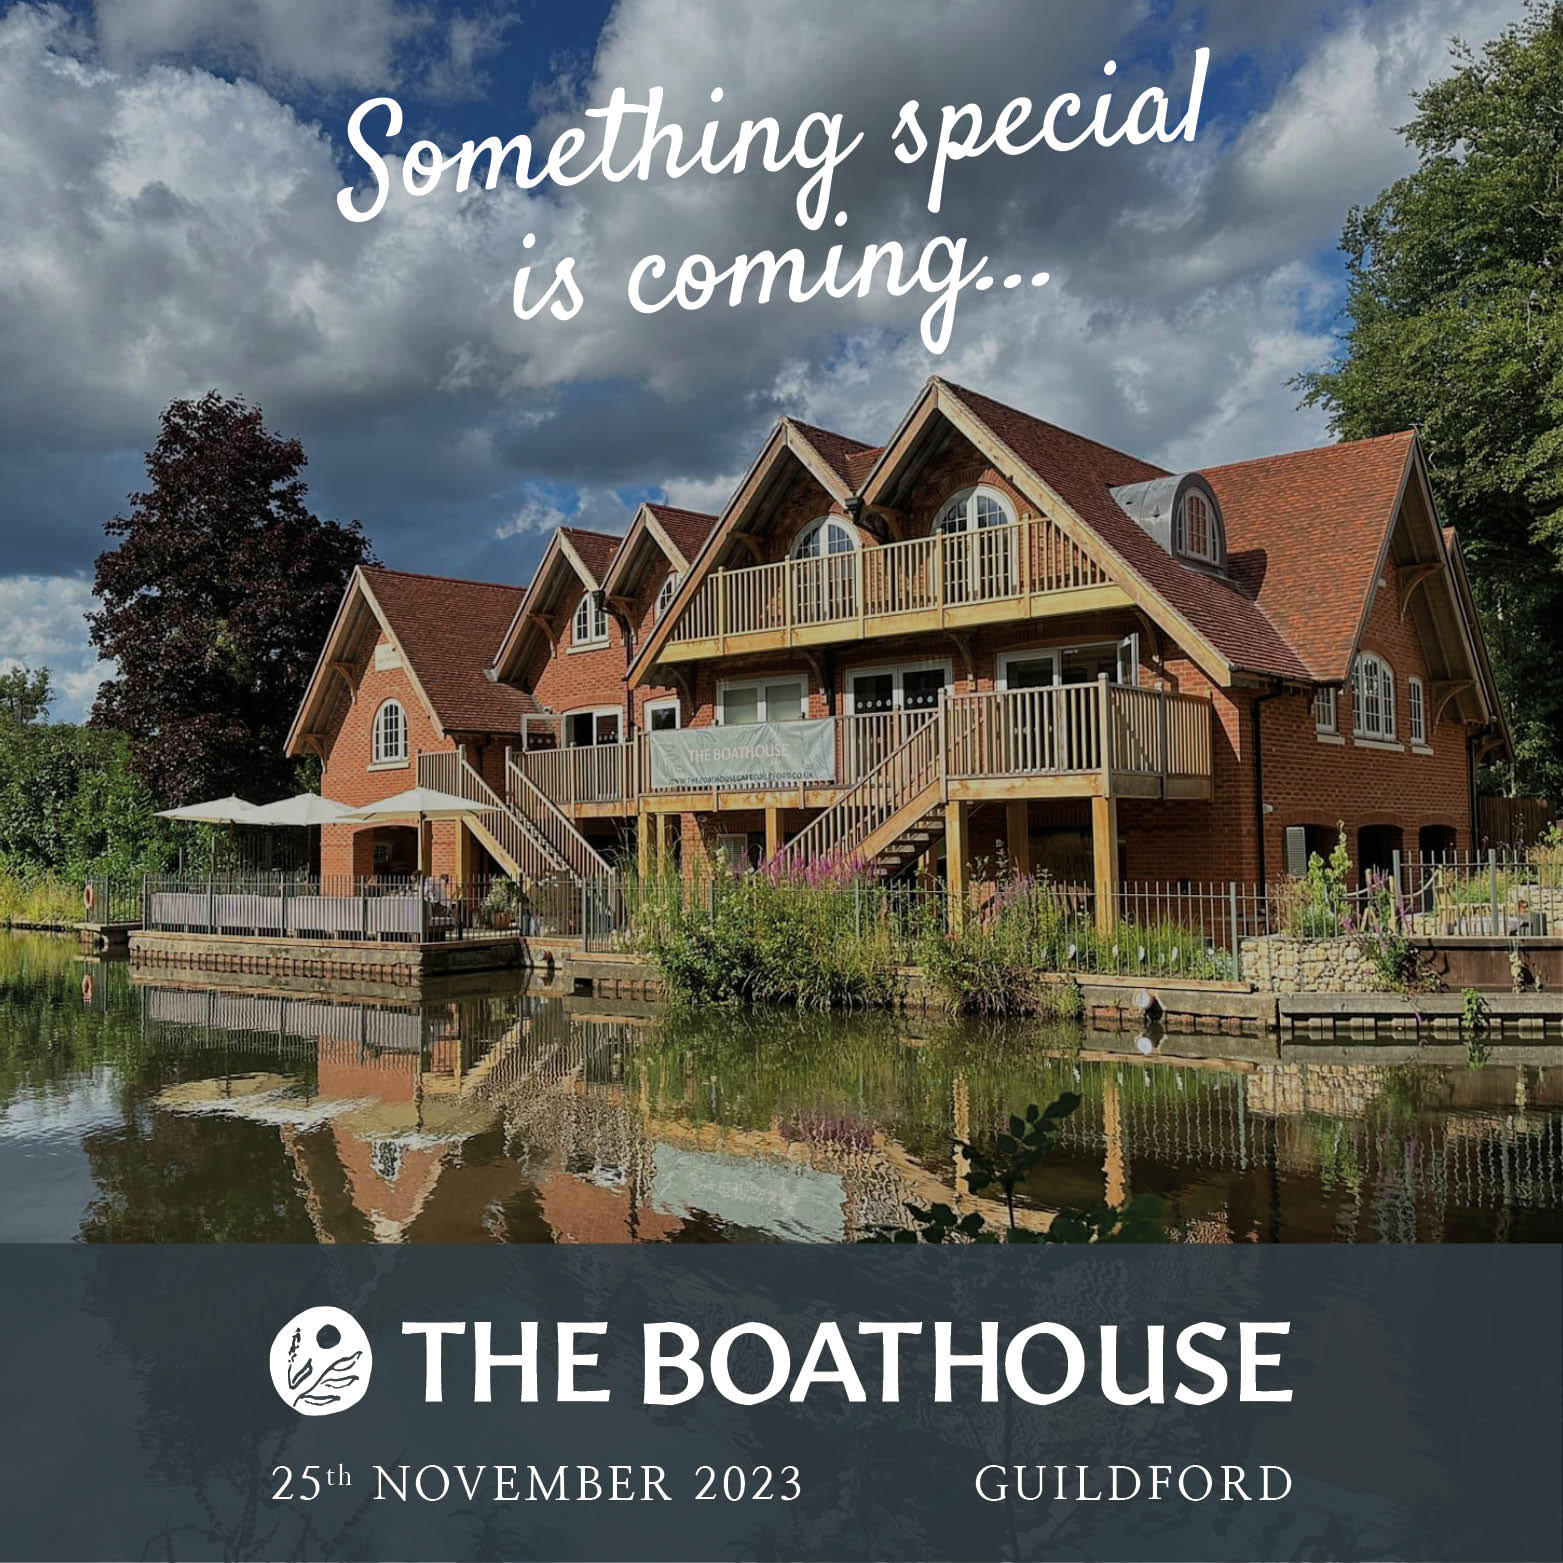 The Boathouse, Guildford October Event with The surrey Circle